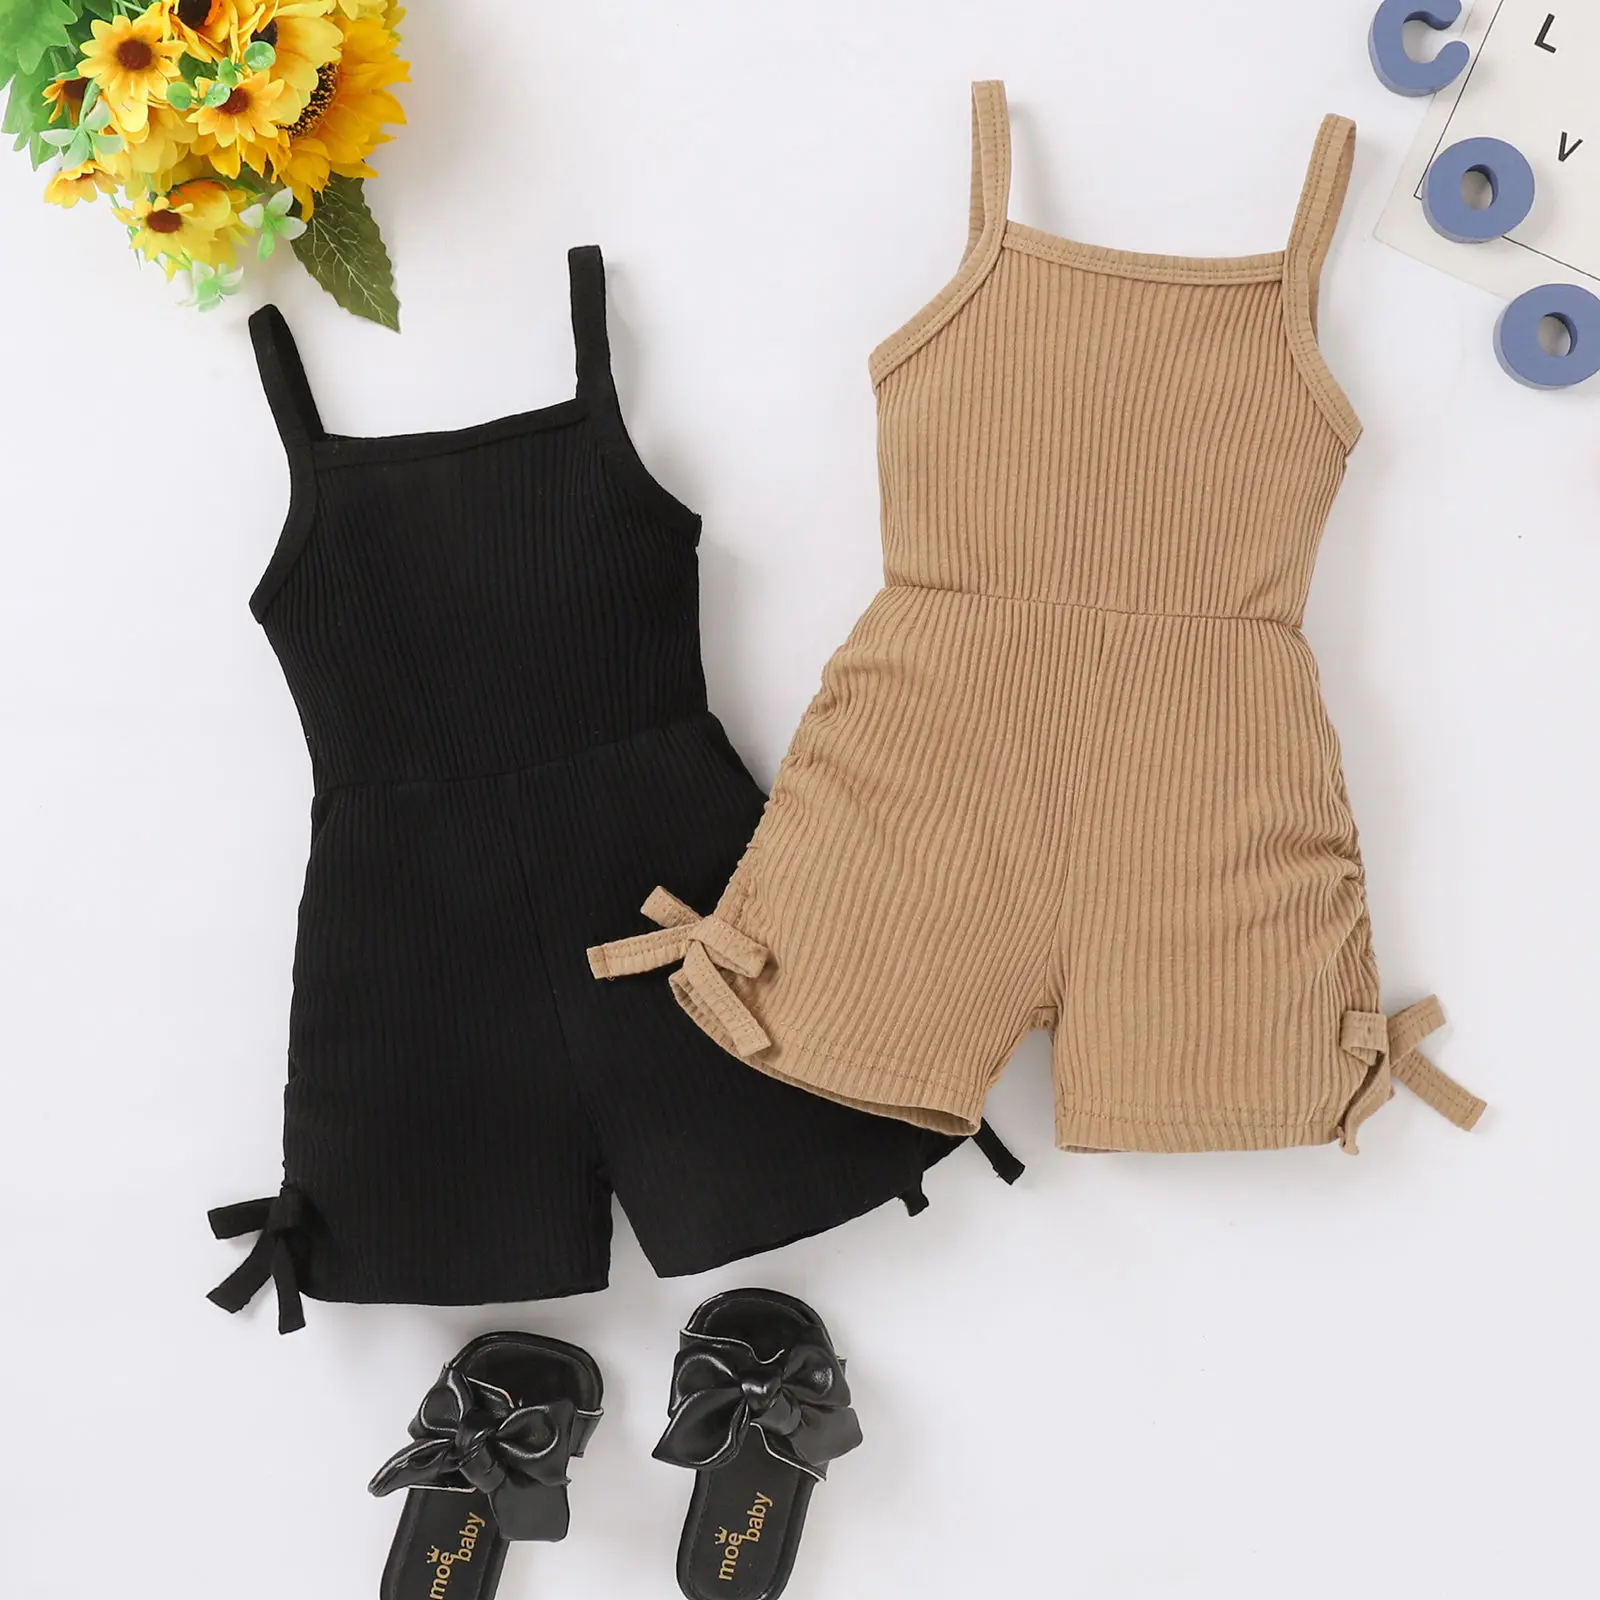 Wholesale new design toddler girls solid sleeveless jumpsuits casual summer shorts bodysuits kids clothing